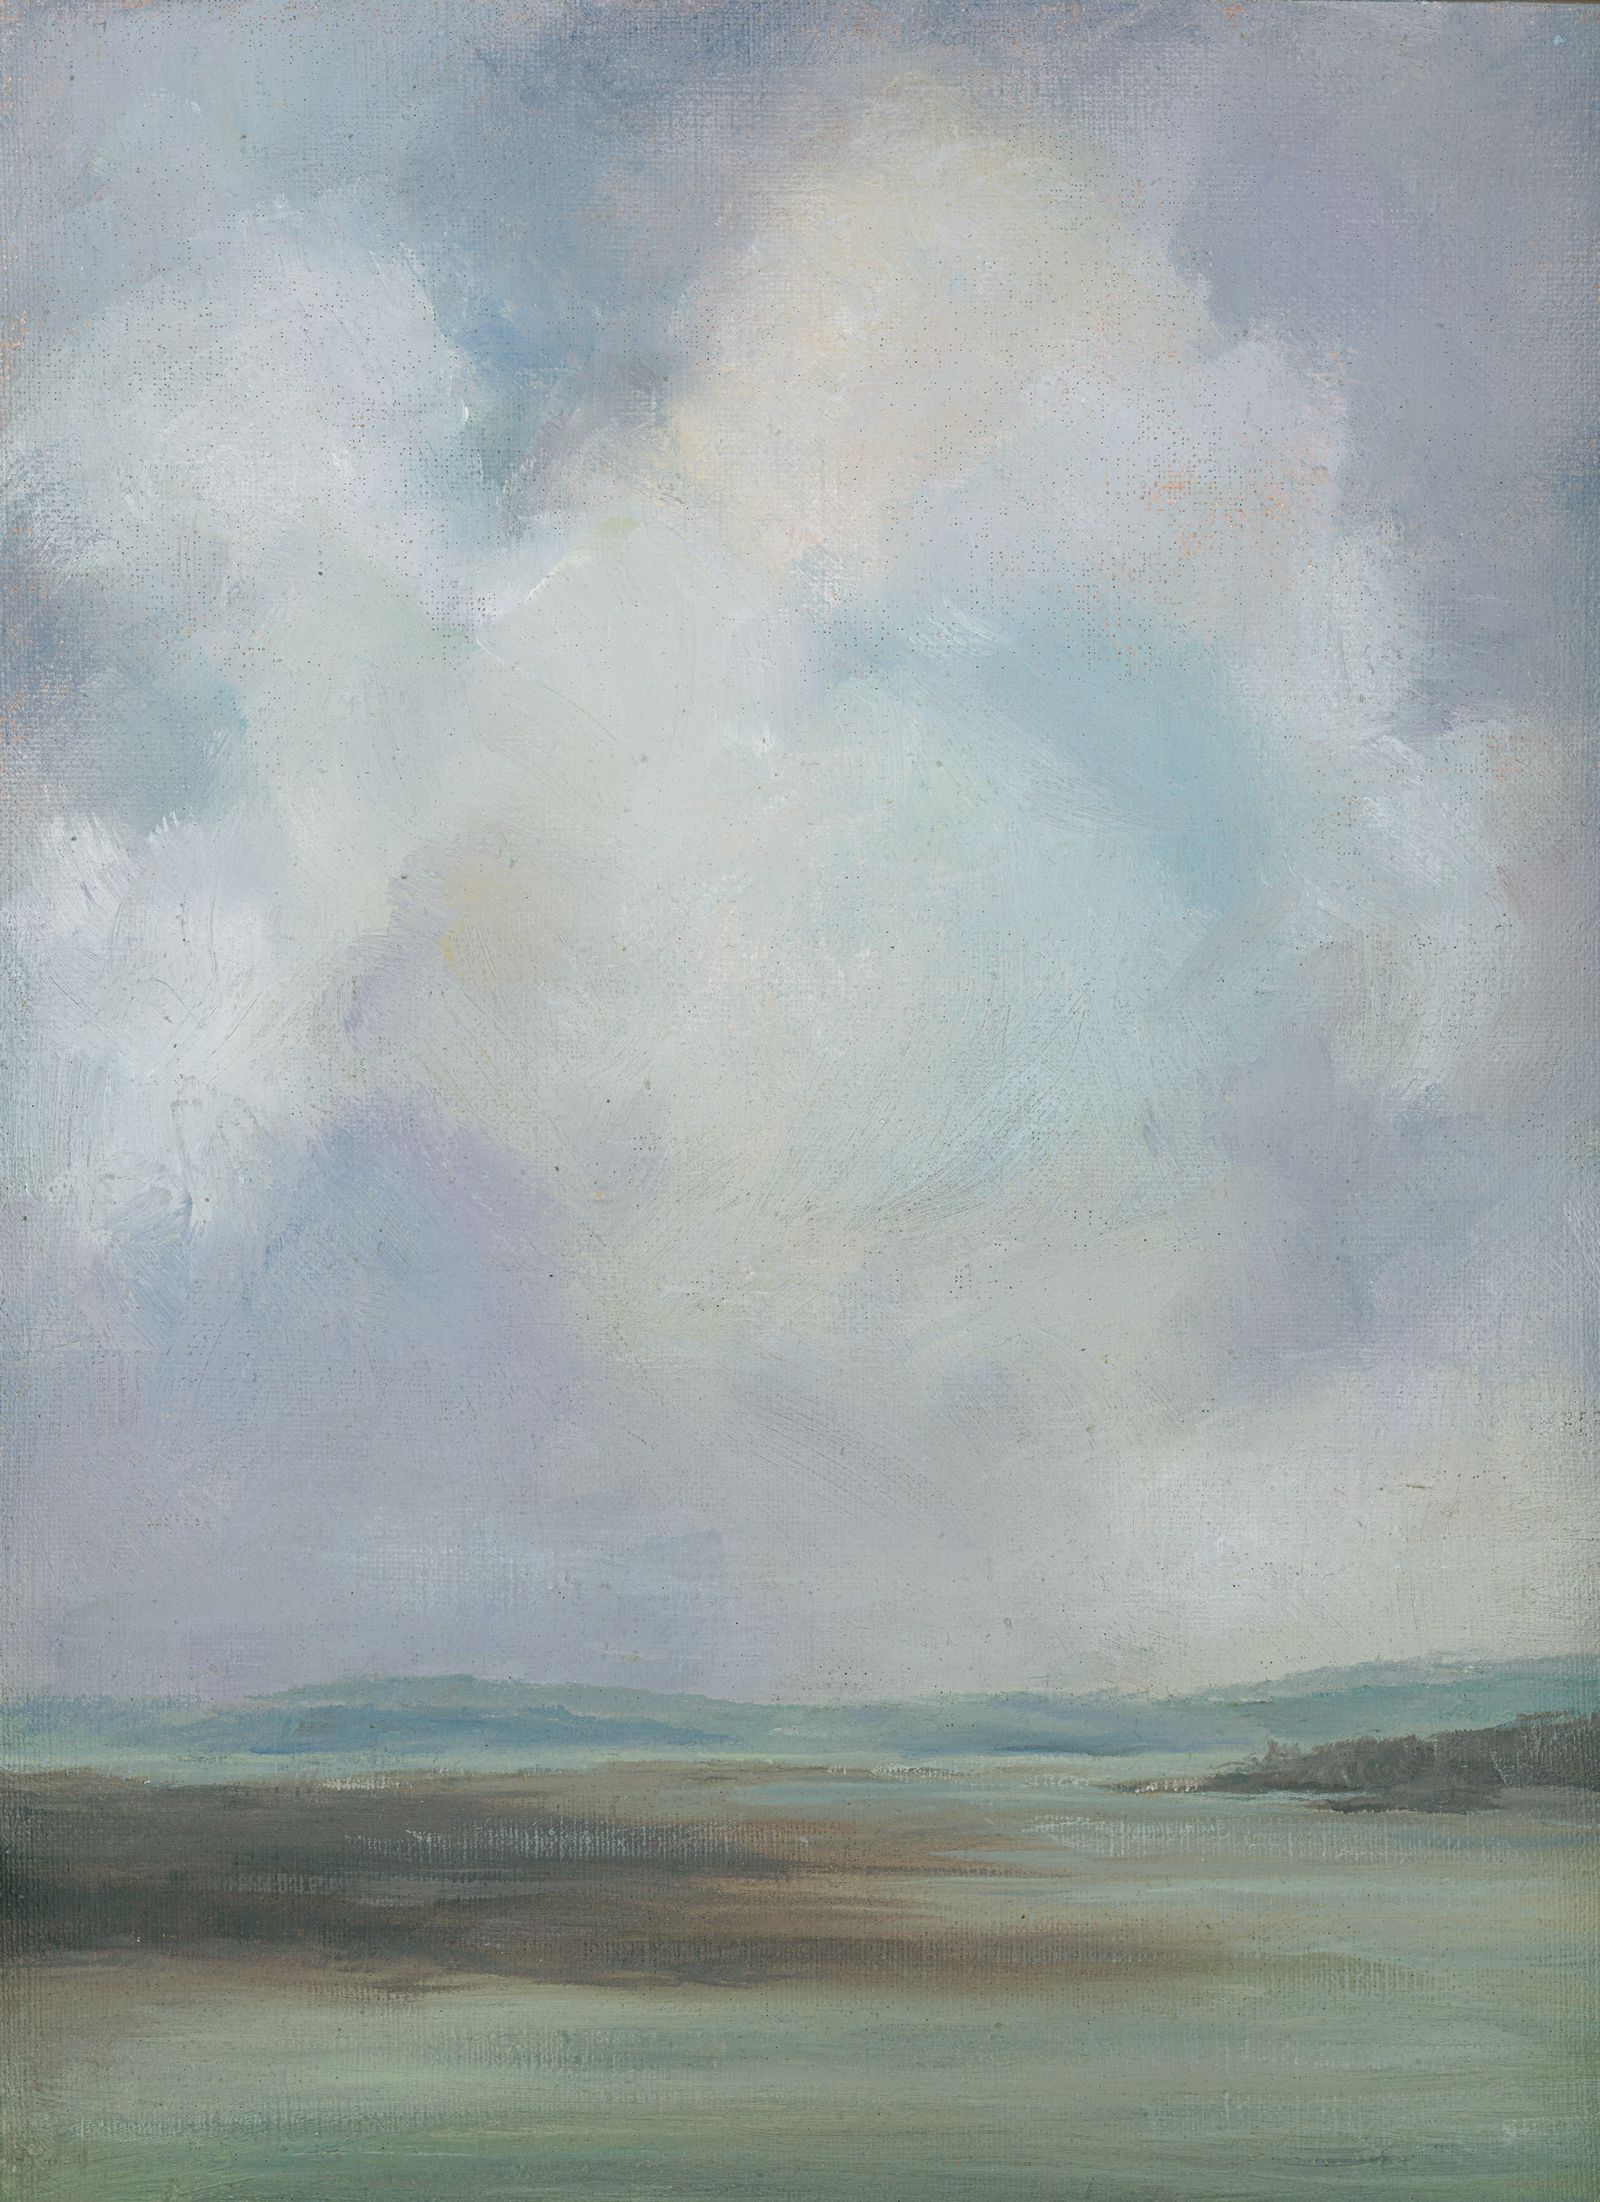 This is an oil painting on linen of a view across a marsh, looking at distant hill with billowing clouds.